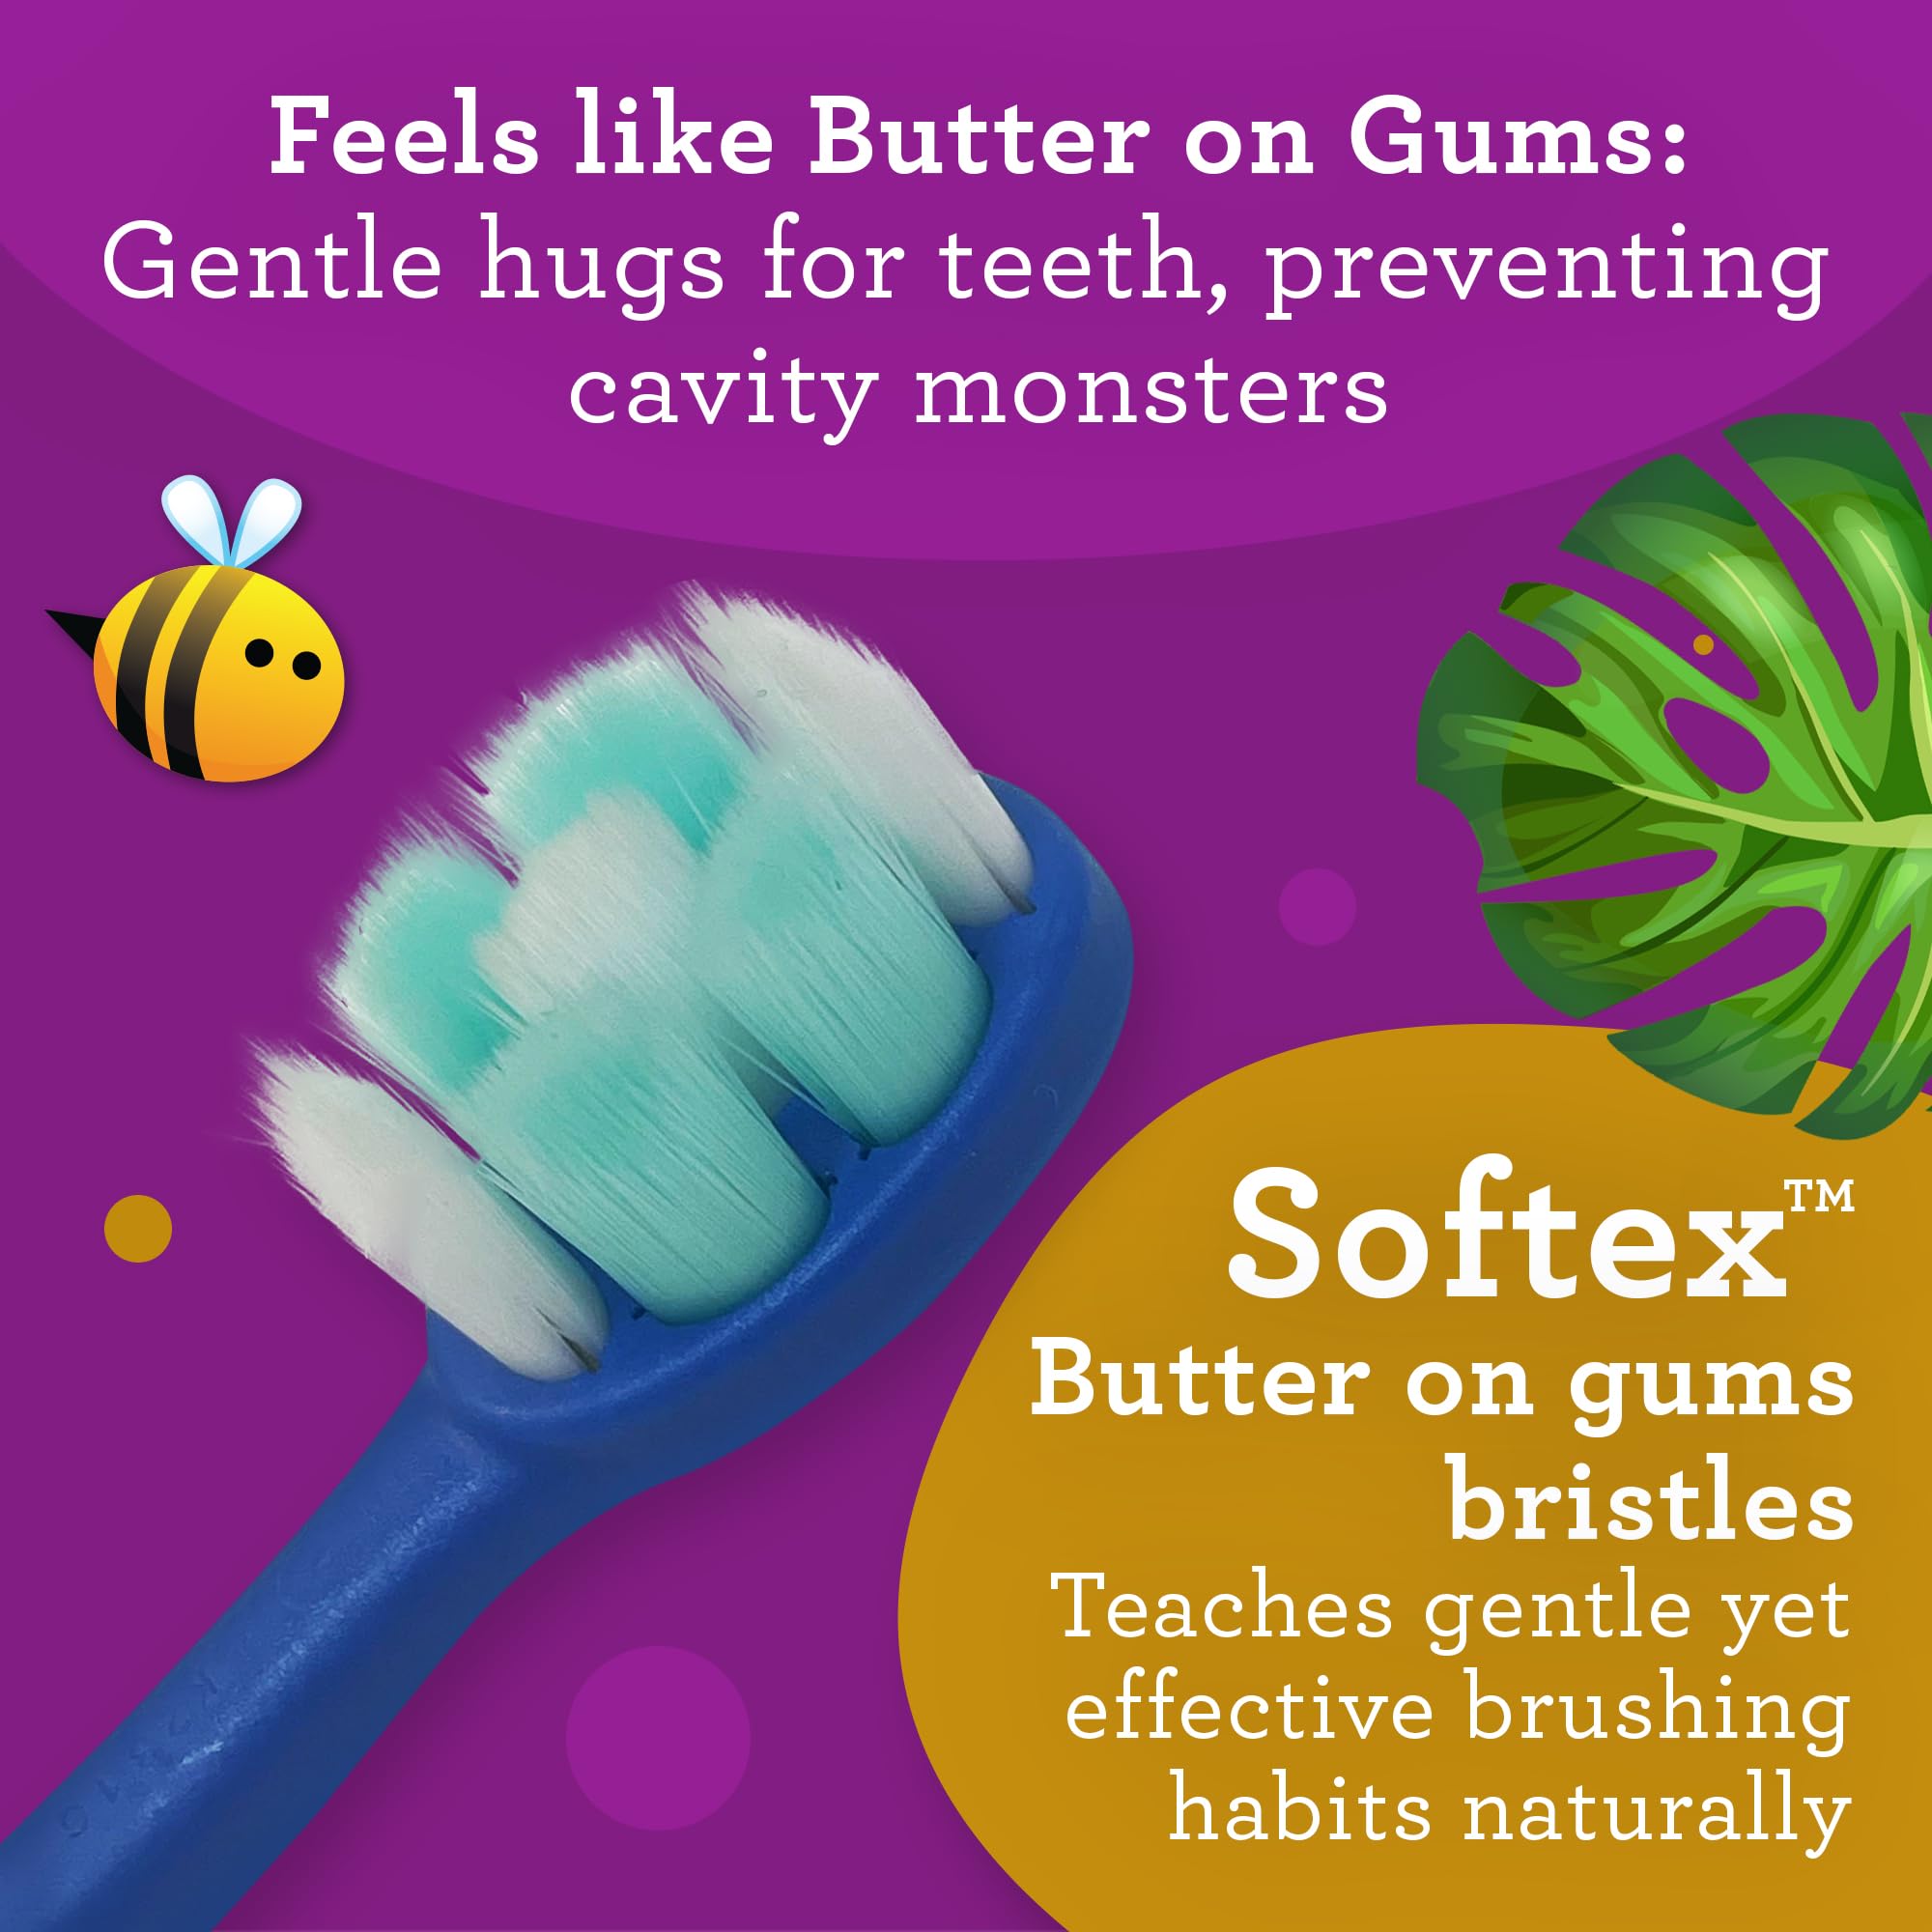 GuruNanda Butter On Gums Kids Toothbrush - 4 Pack Extra Soft Bristles Toothbrush for Kids, Multi-Colored & Fun to Use for Beginner Cleaning - Ergonomic Grip Handle - BPA & Cruelty-Free (Age 3+)